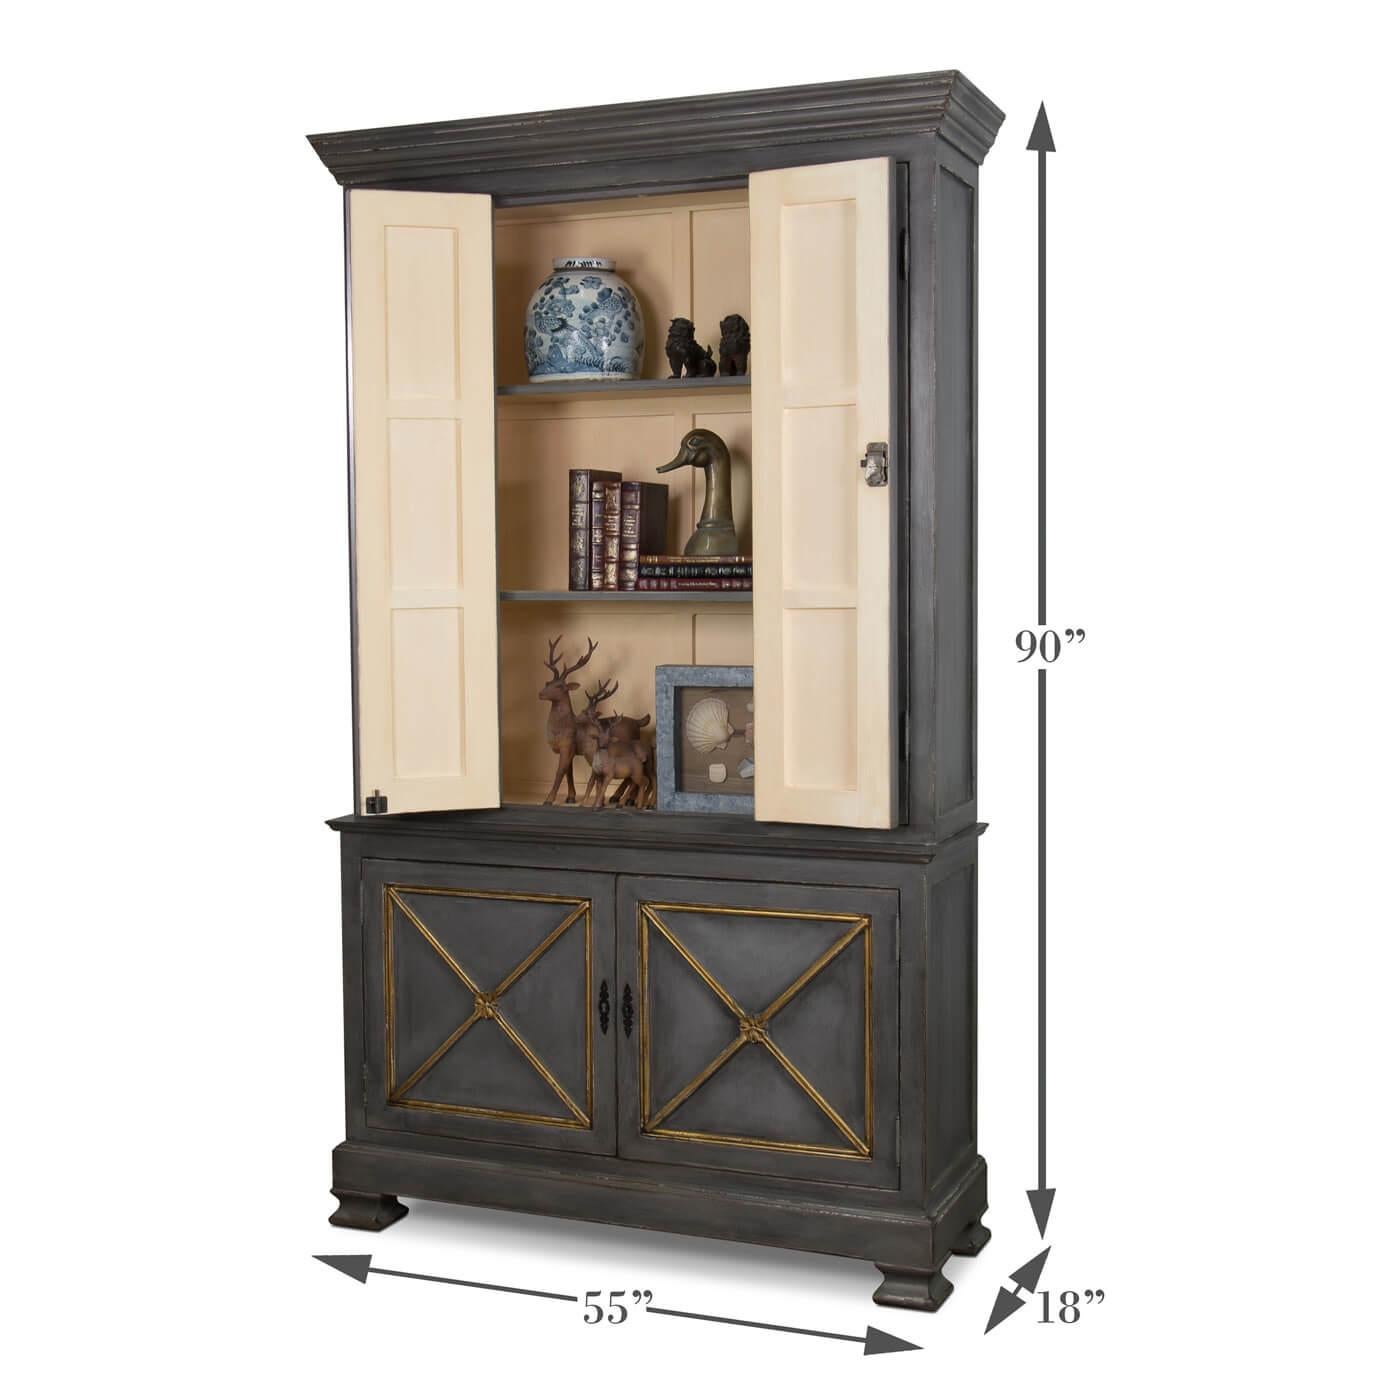 Wood Provincial Painted Tall Bookcase, Grey For Sale